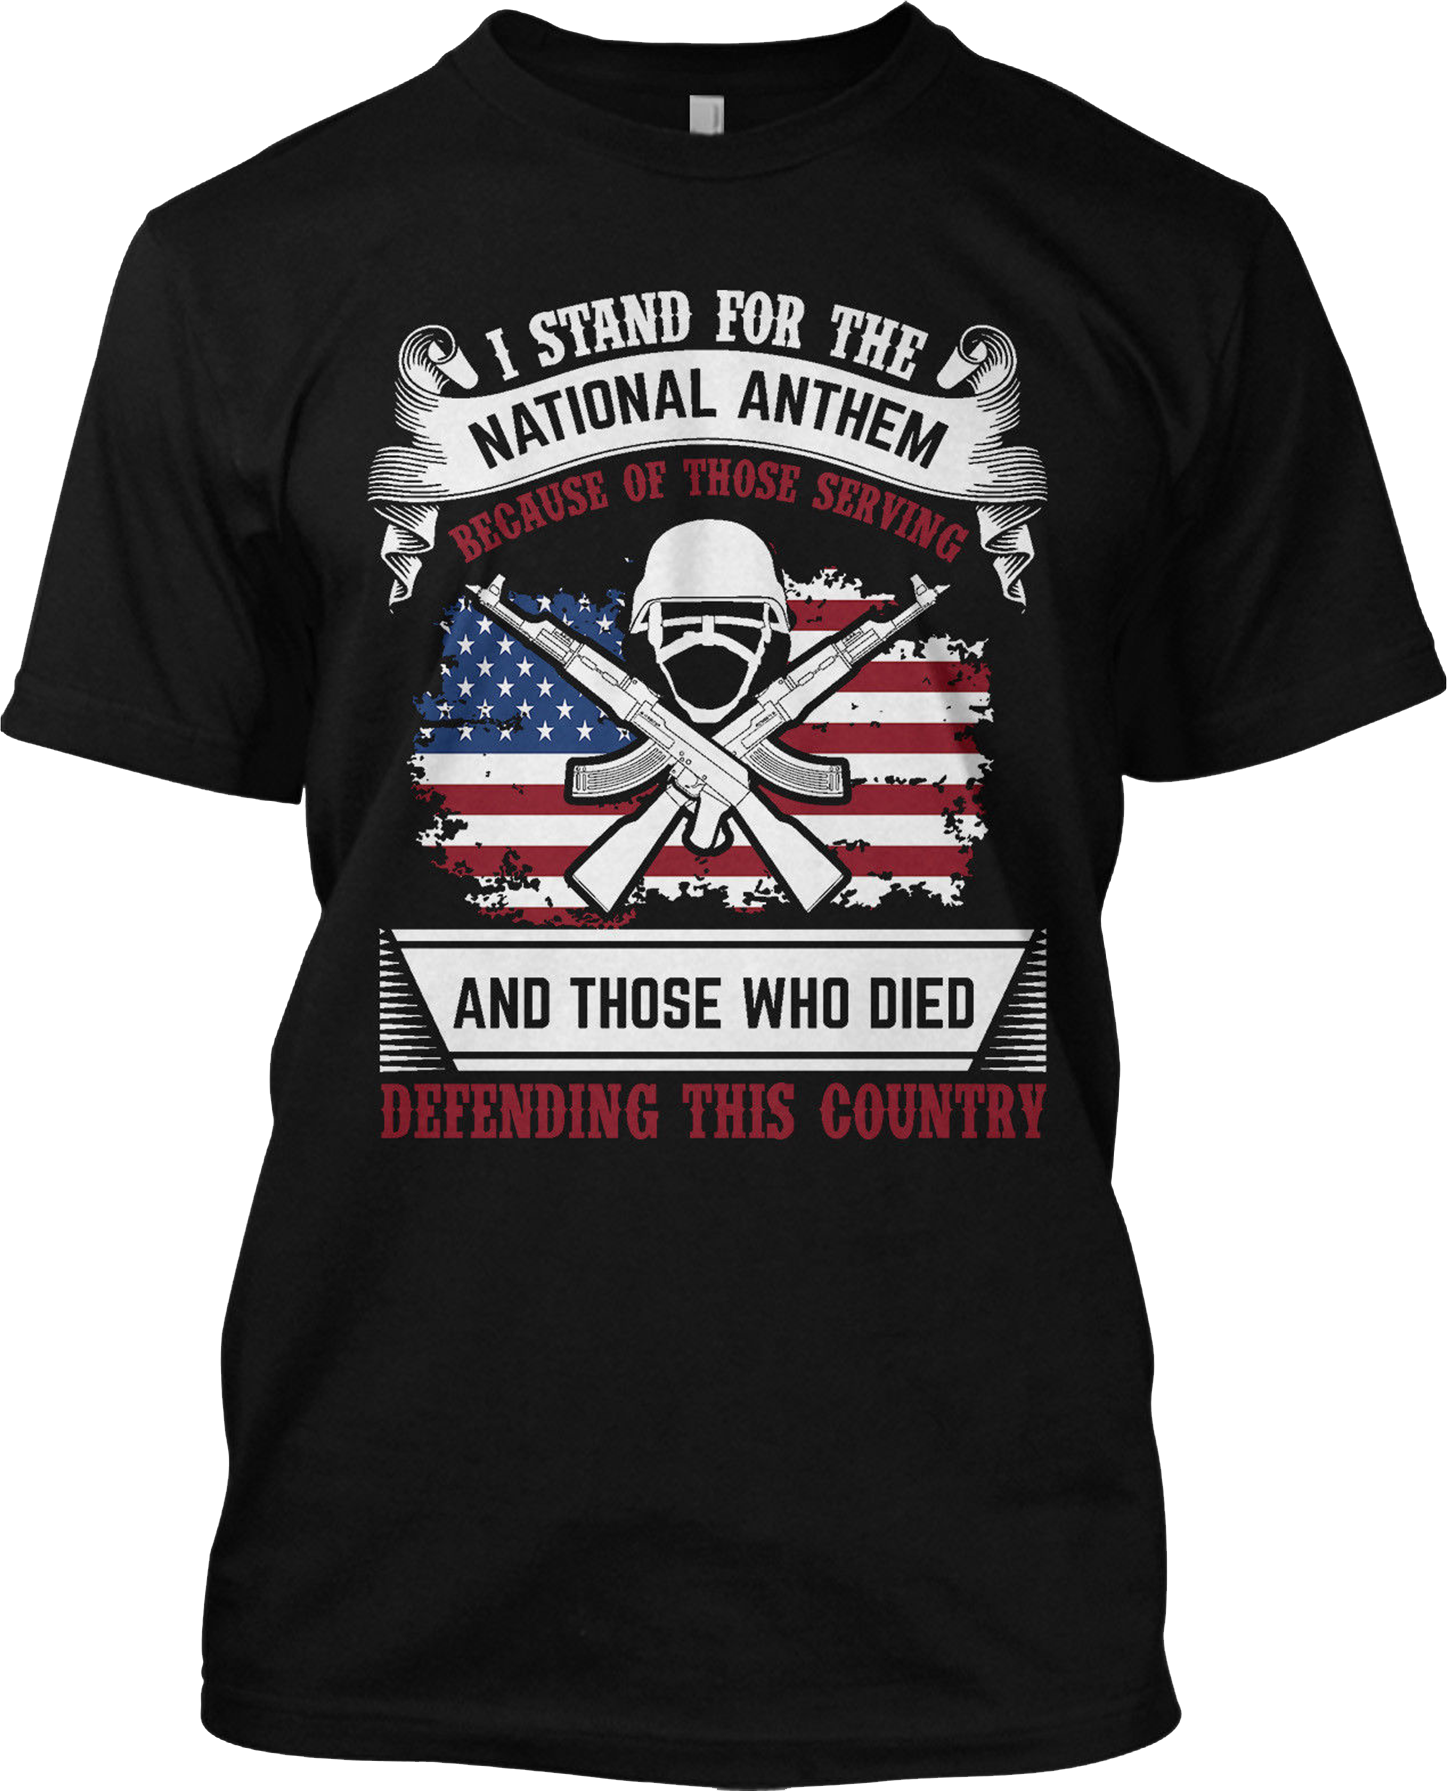 I Stand For The National Anthem US Patriotic T Shirt Those Who Died Tee